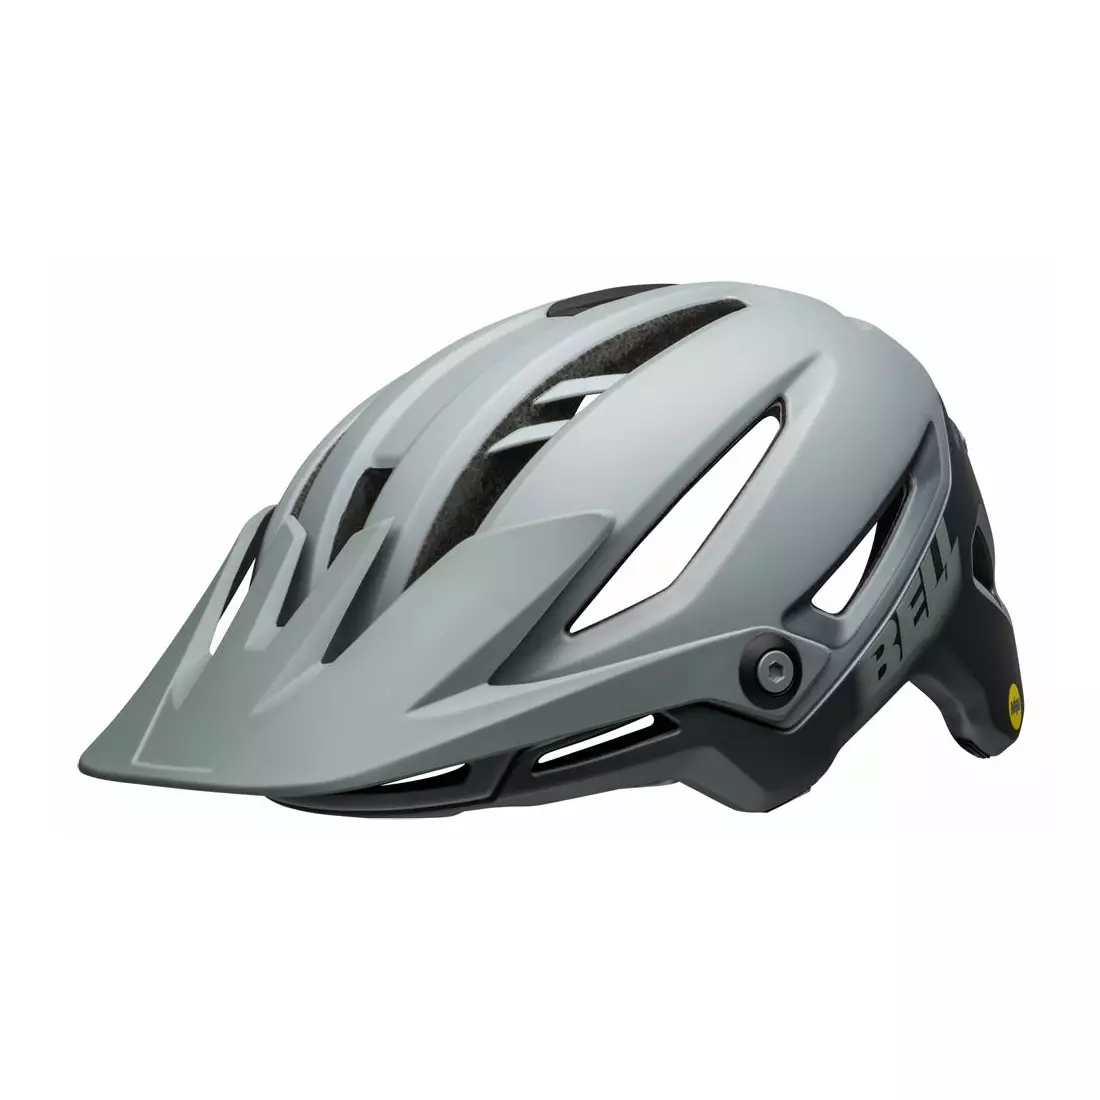 BELL bicycle helmet mtb SIXER INTEGRATED MIPS, matte gloss grays 